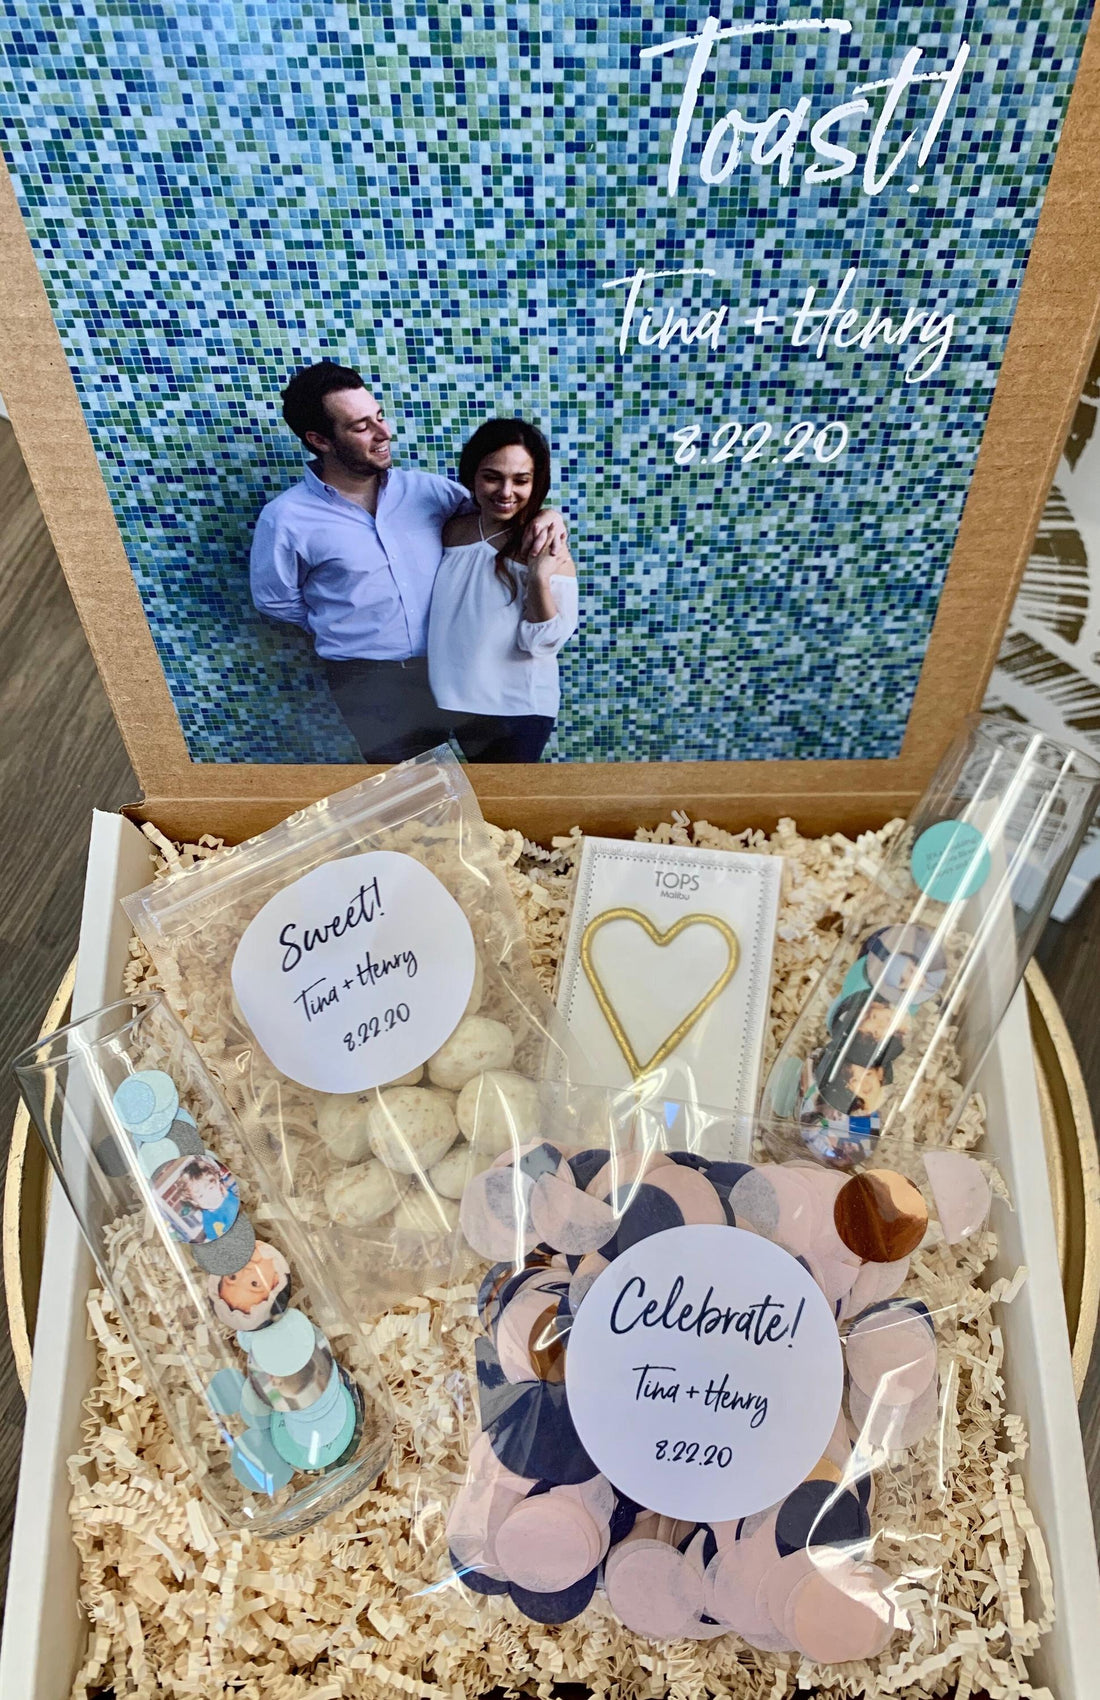 Introducing Customized Special Occasion Gift Boxes!